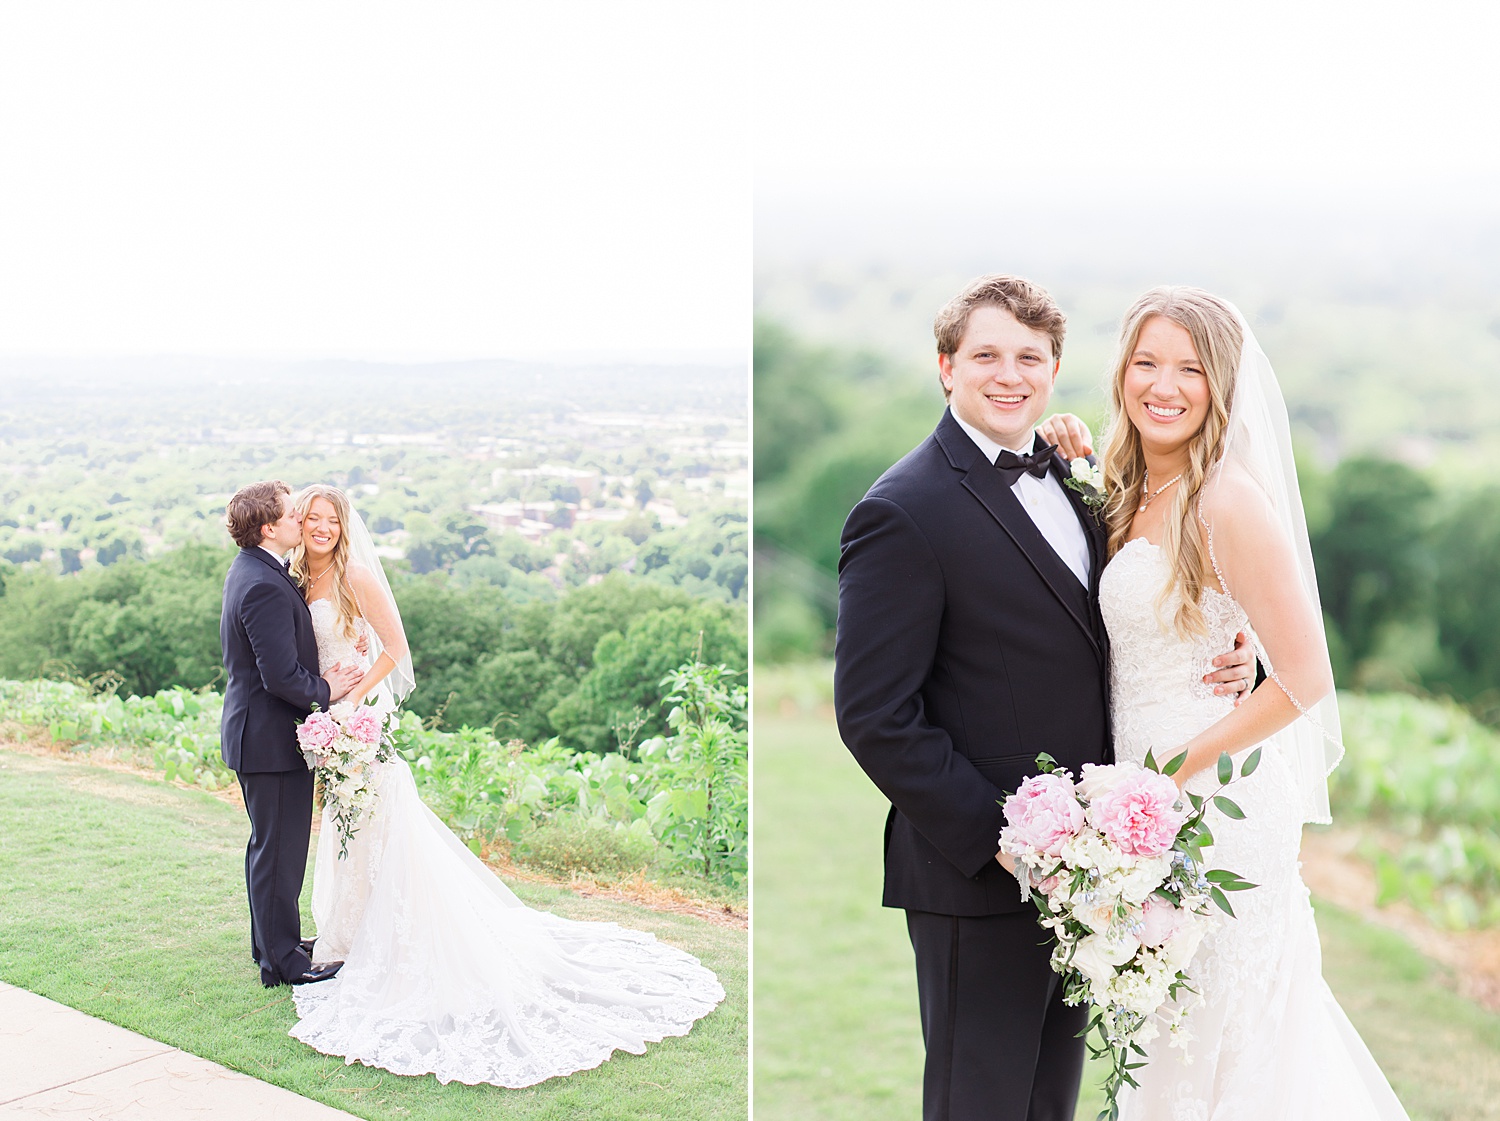 wedding portraits with a scenic view from a hilltop in Birmingham AL